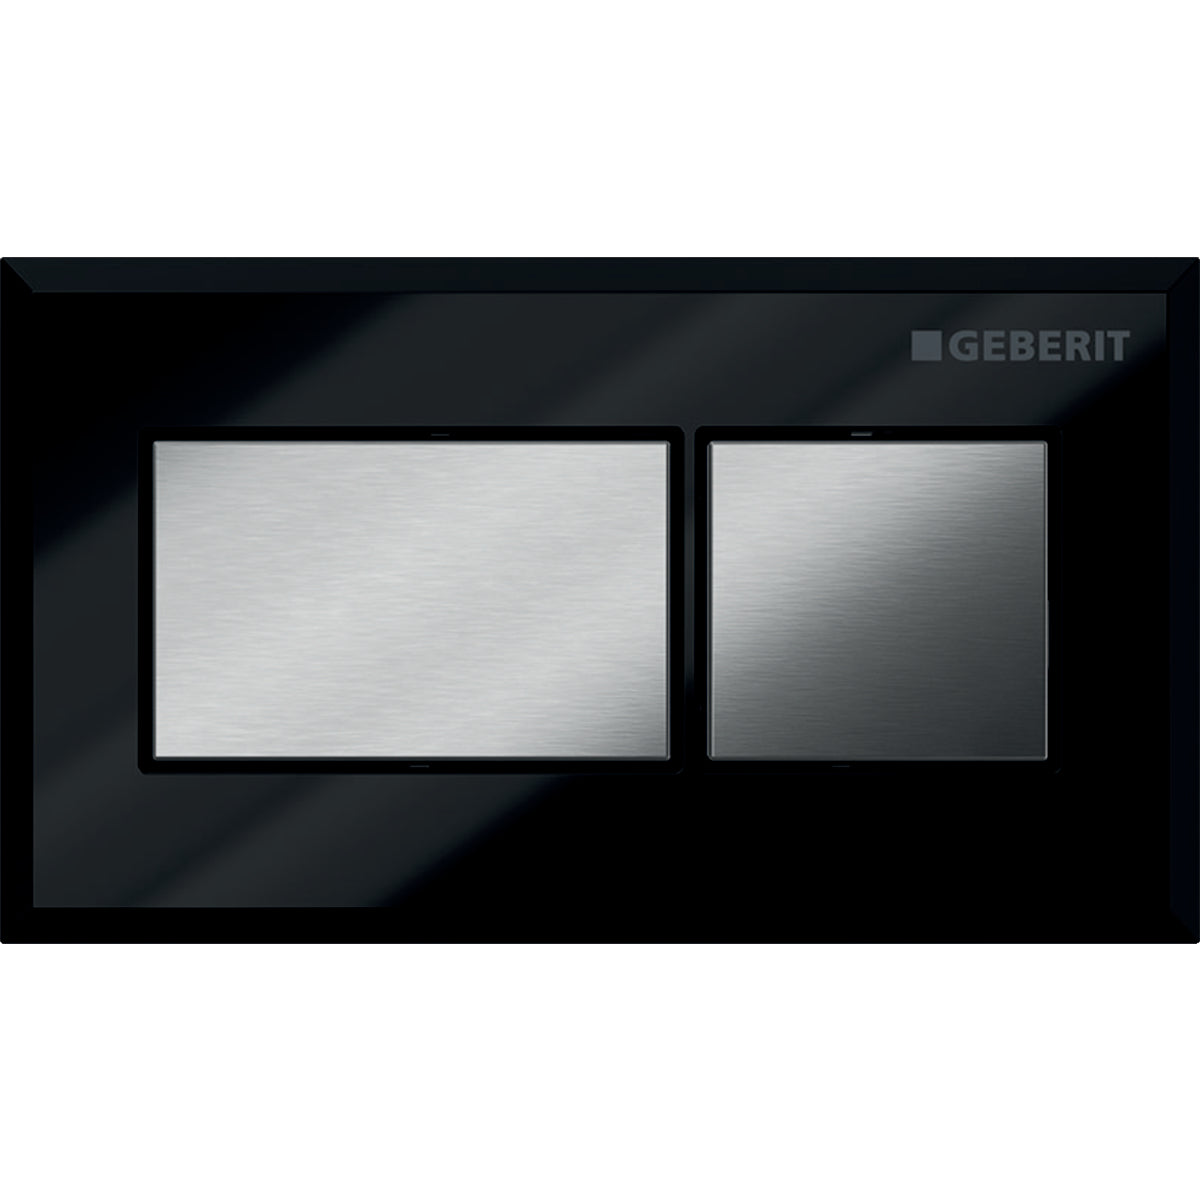 Geberit 116.053.KV.1- Geberit remote flush actuation, square design, pneumatic, for dual flush, for Sigma concealed cistern 8 cm, concealed actuator: black, chrome-plated, brushed - FaucetExpress.ca